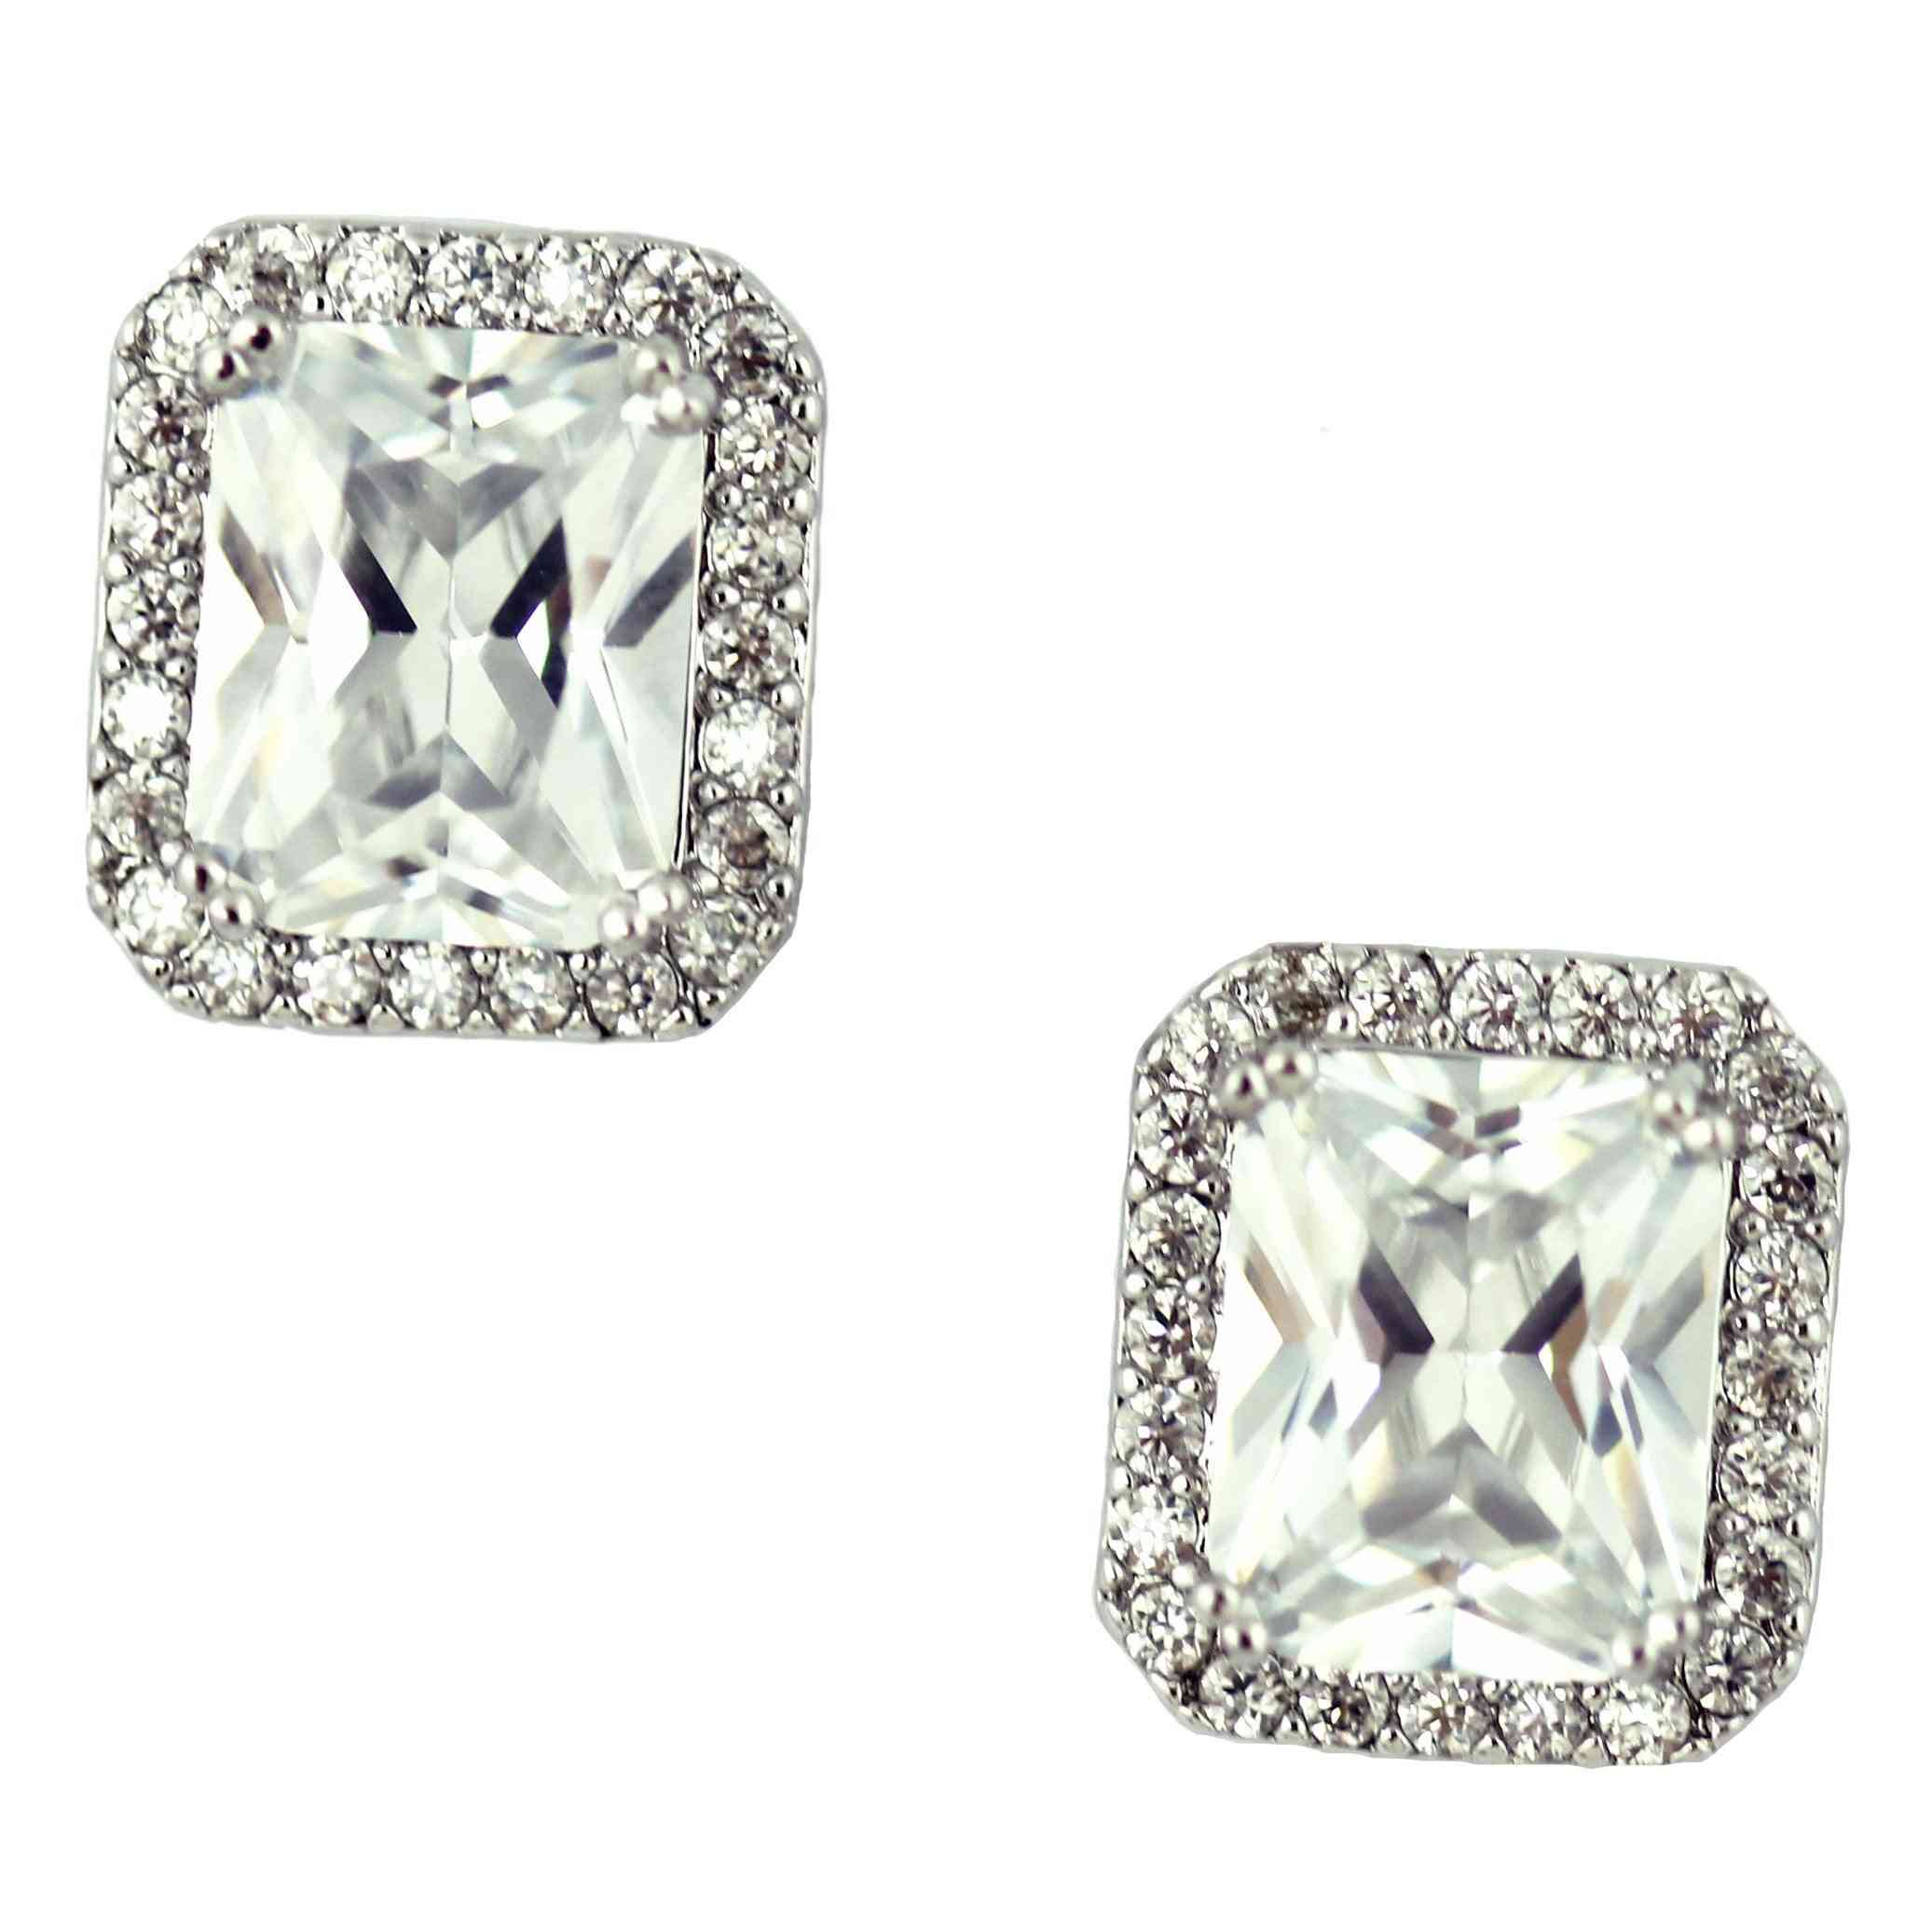 Pink Cubic Zirconia-square Cut Crystal Studs